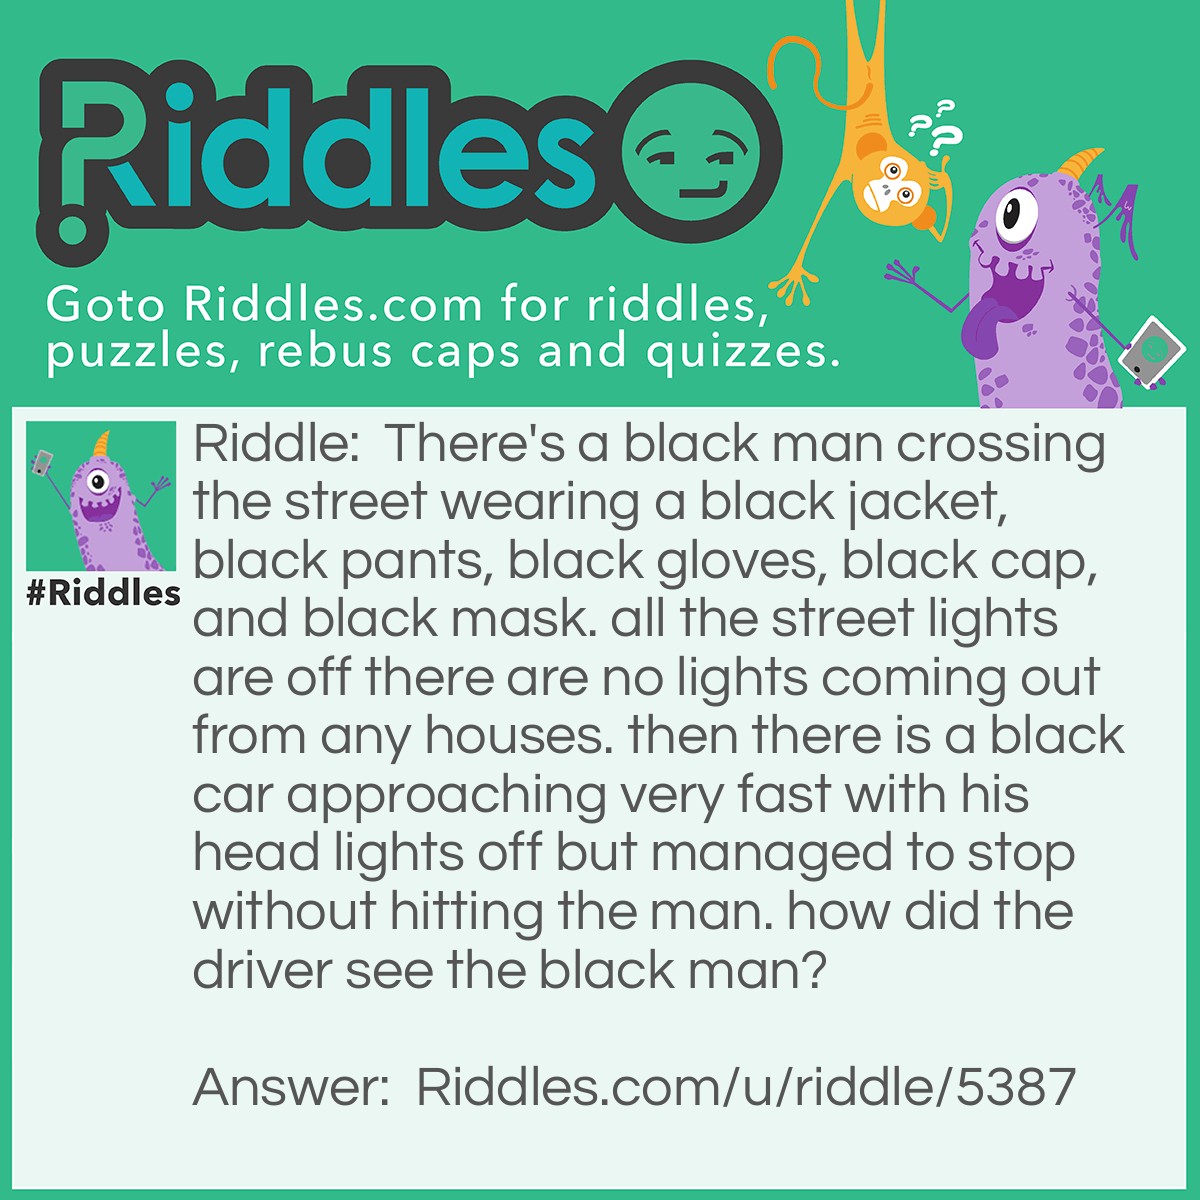 Riddle: There's a black man crossing the street wearing a black jacket, black pants, black gloves, black cap, and black mask. all the street lights are off there are no lights coming out from any houses. then there is a black car approaching very fast with his head lights off but managed to stop without hitting the man. how did the driver see the black man? Answer: The sun is up.